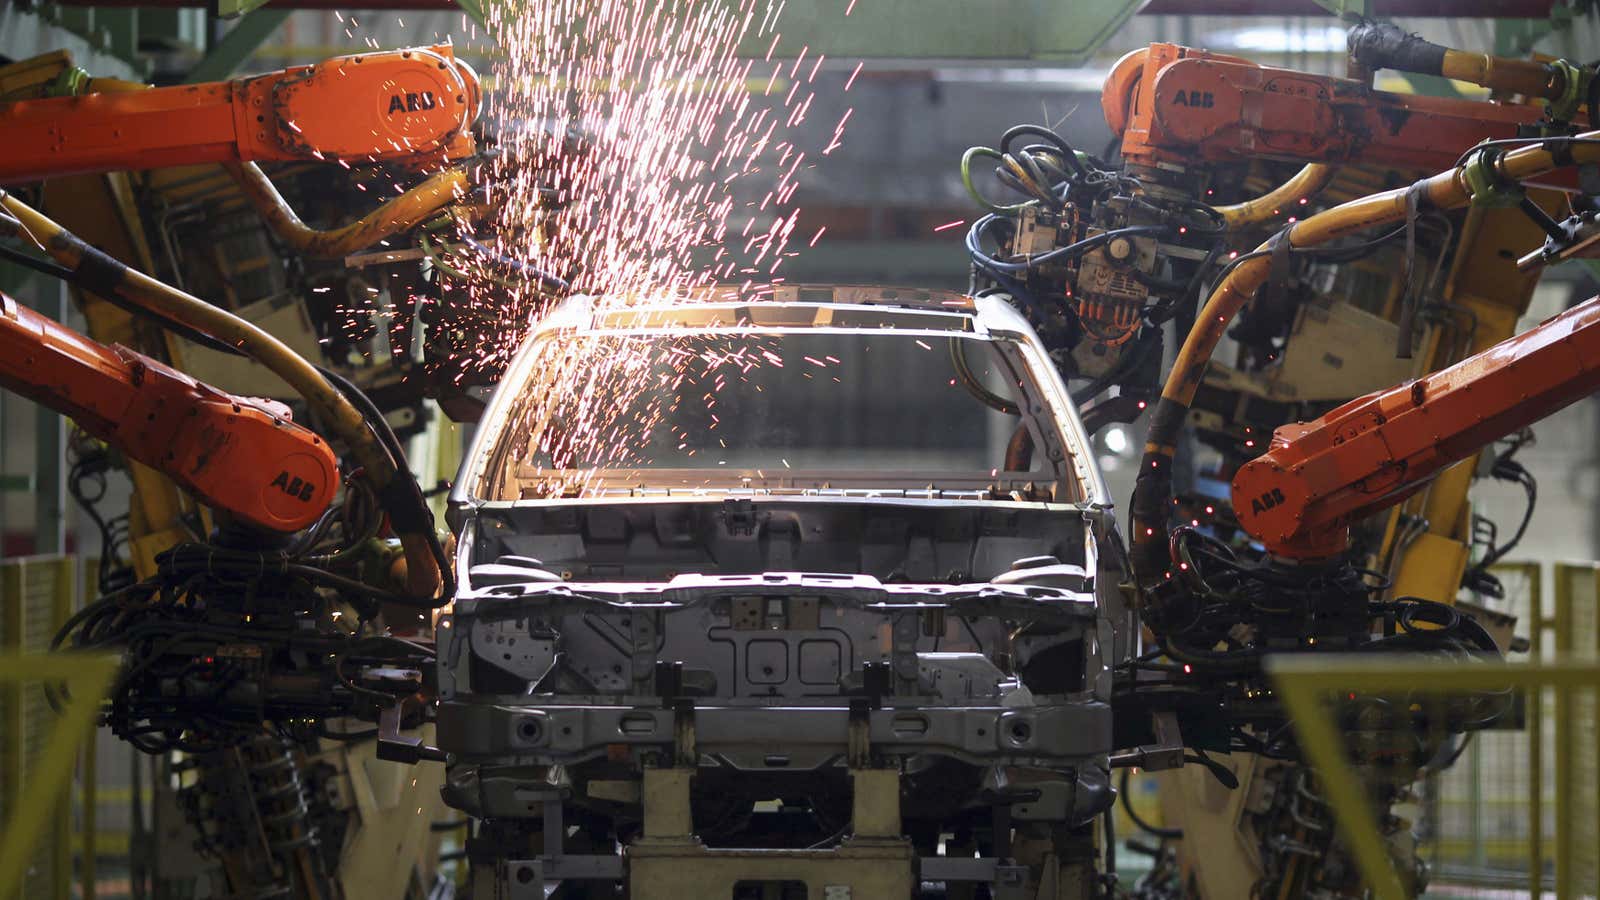 Should we treat work done by robots like work done by humans? No, says Andrus Ansip.